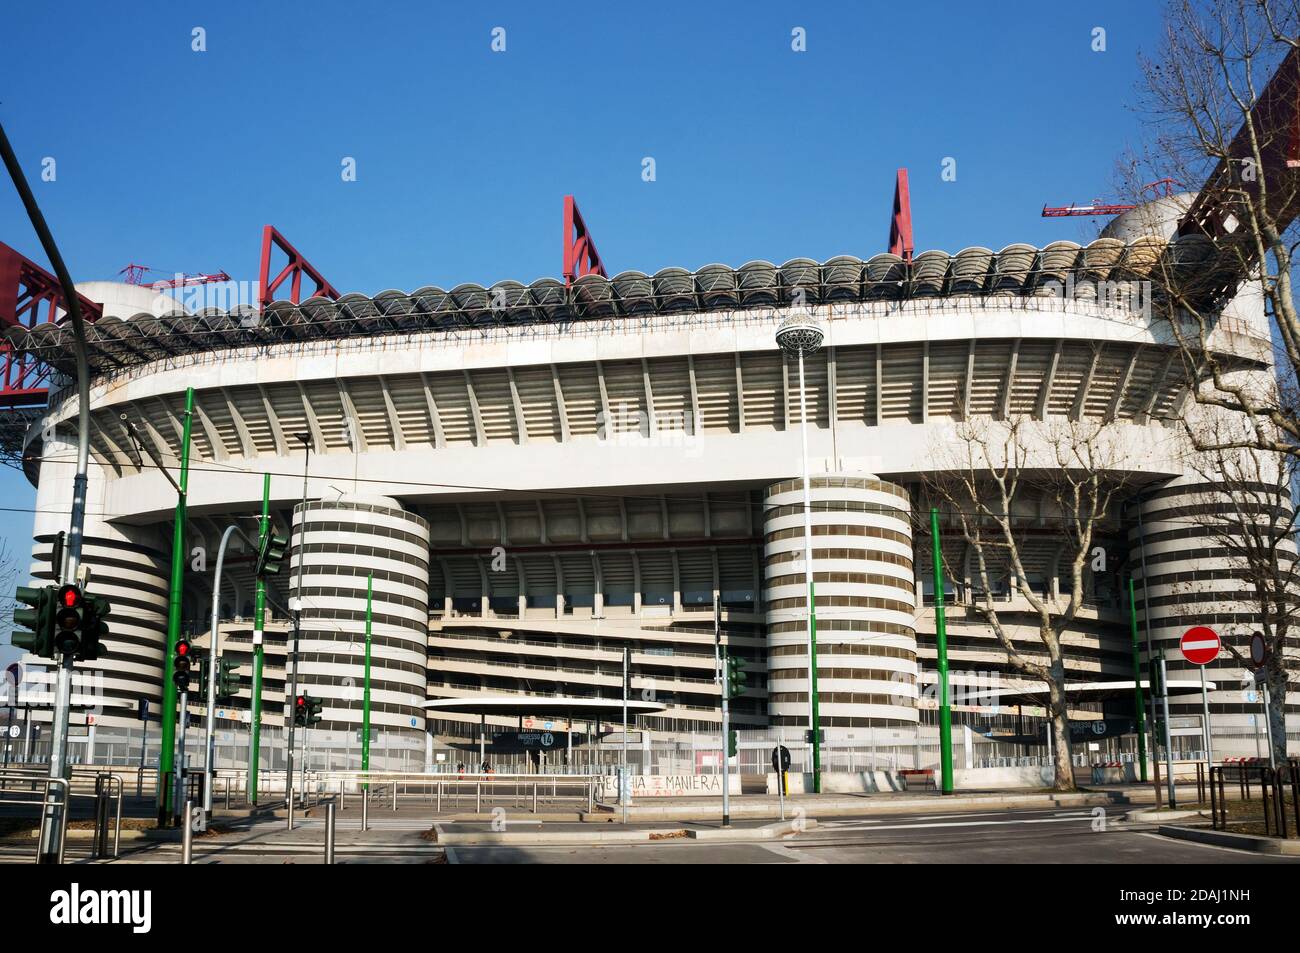 The facade of the old stadium Giuseppe Meazza (San Siro) - the sights of Milan, built in the architectural style of brutalism in 1925. Stock Photo